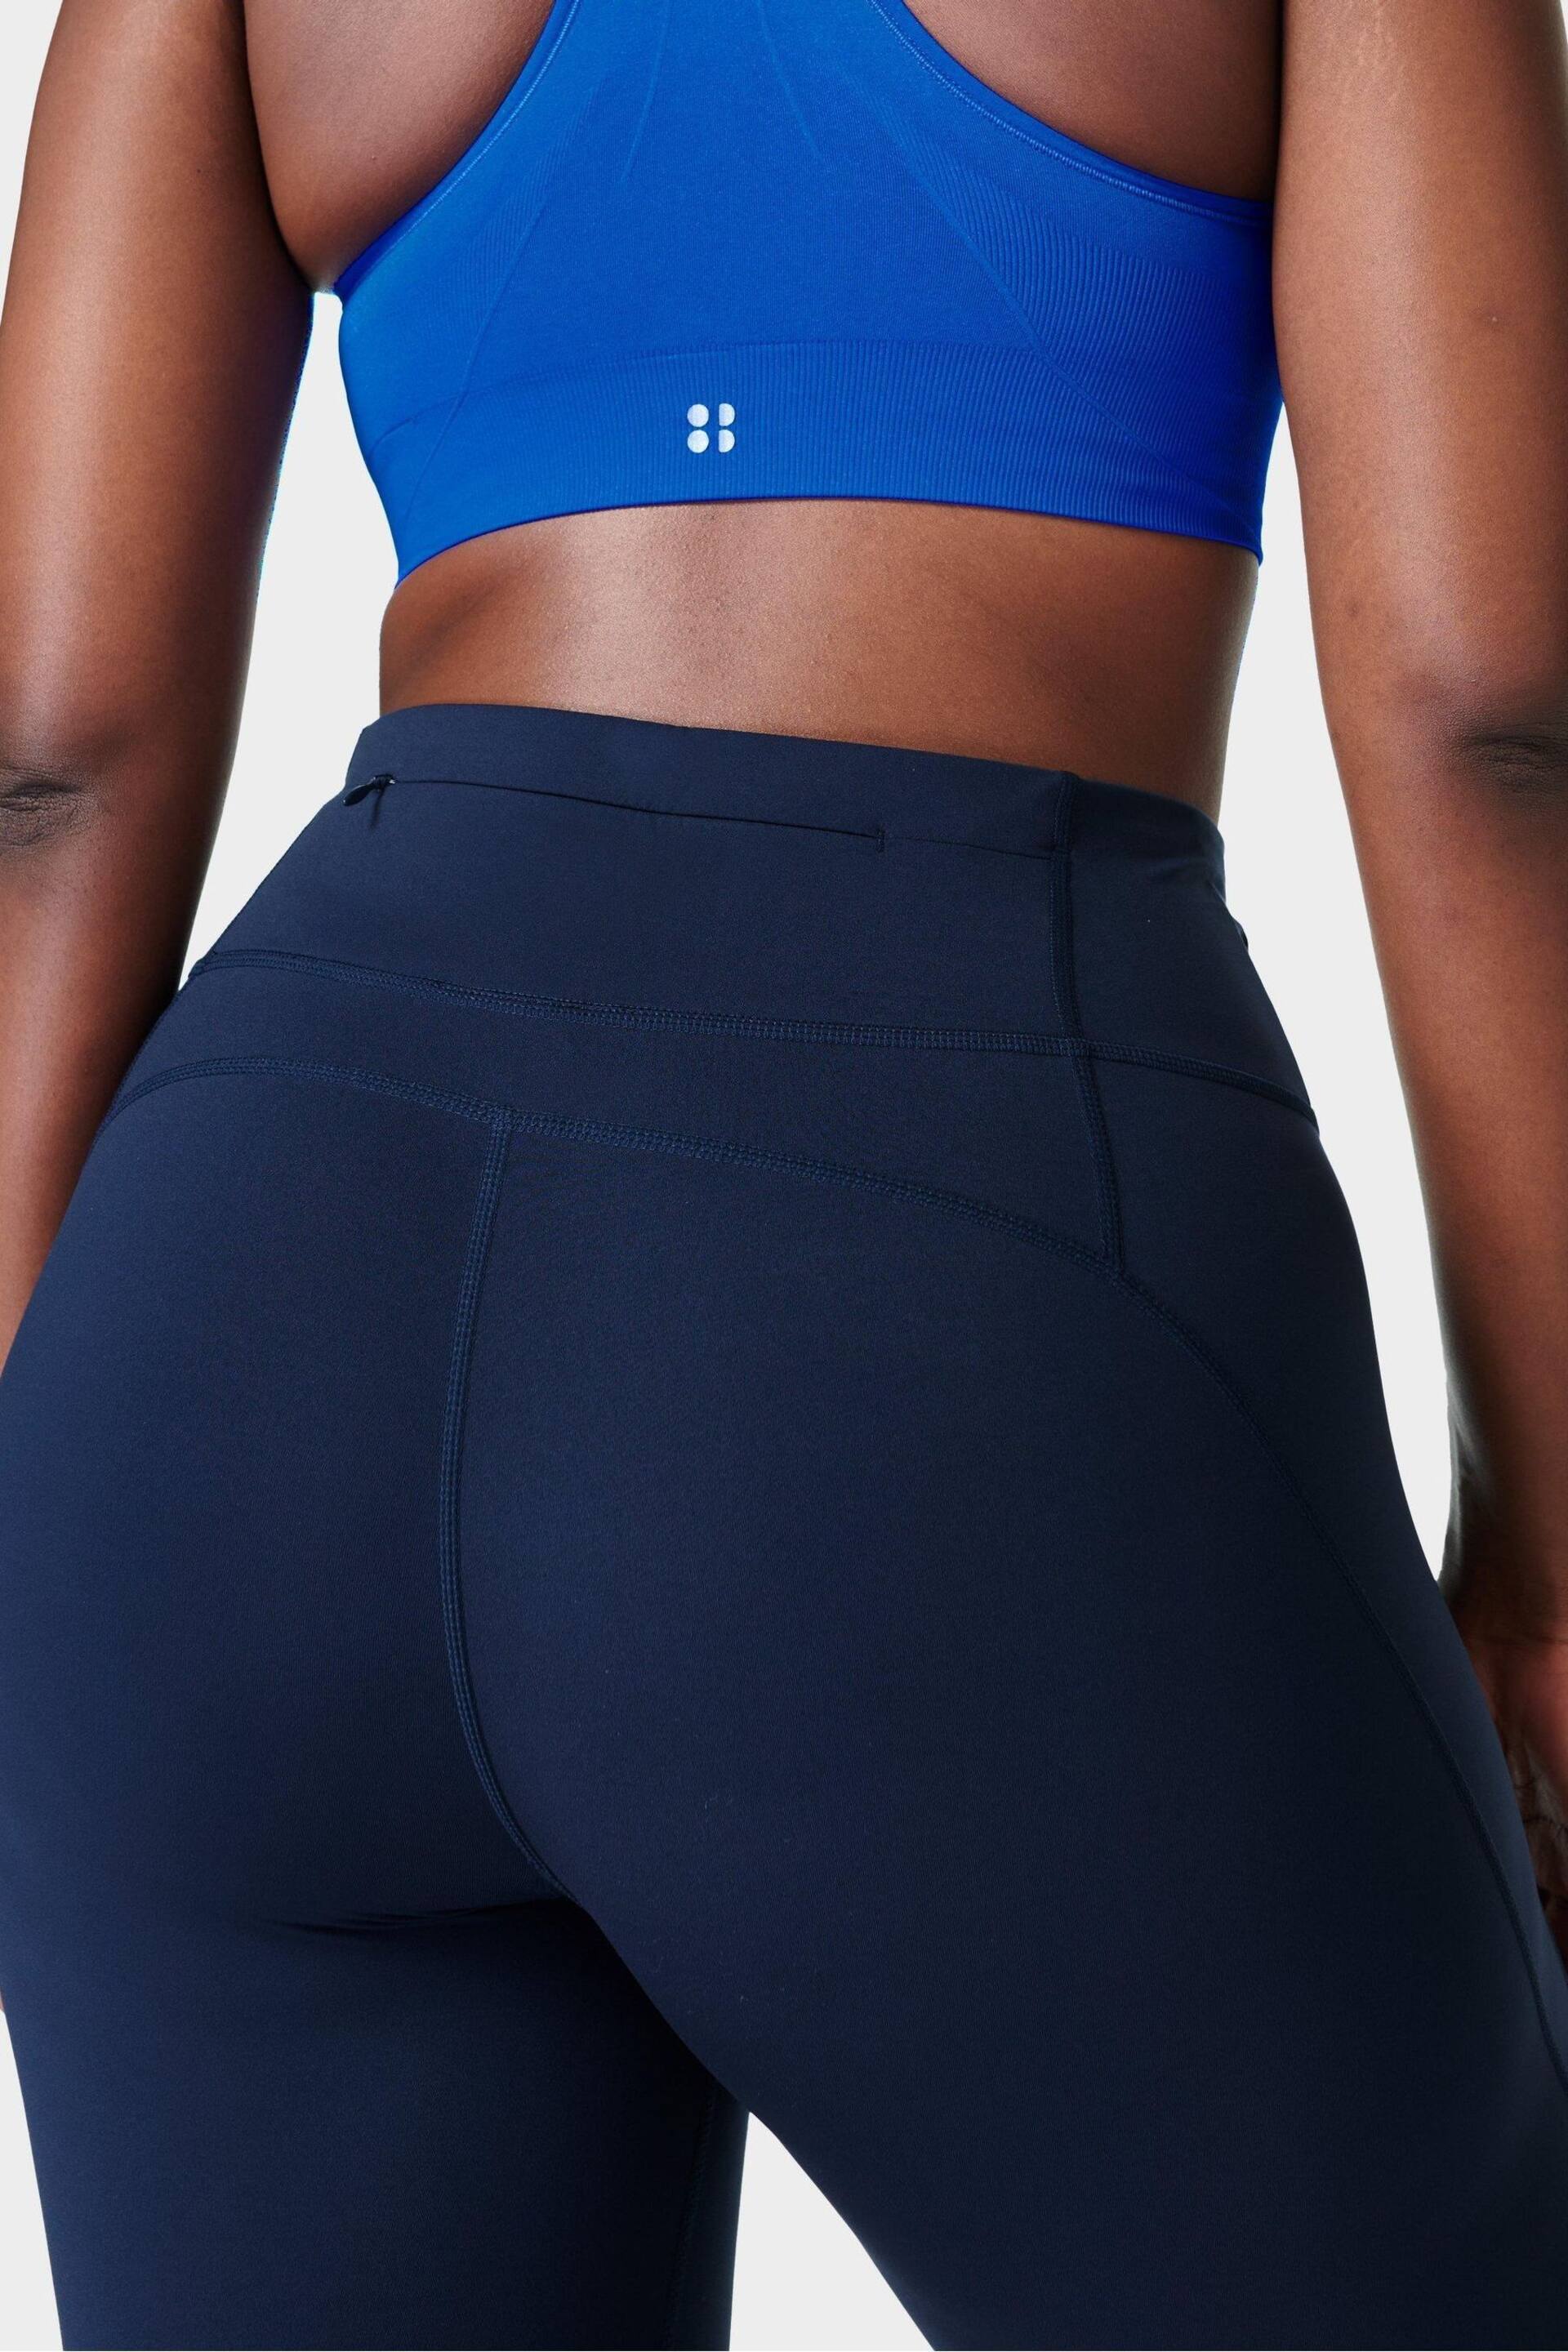 Sweaty Betty Navy Blue Power Cropped Workout Leggings - Image 9 of 11